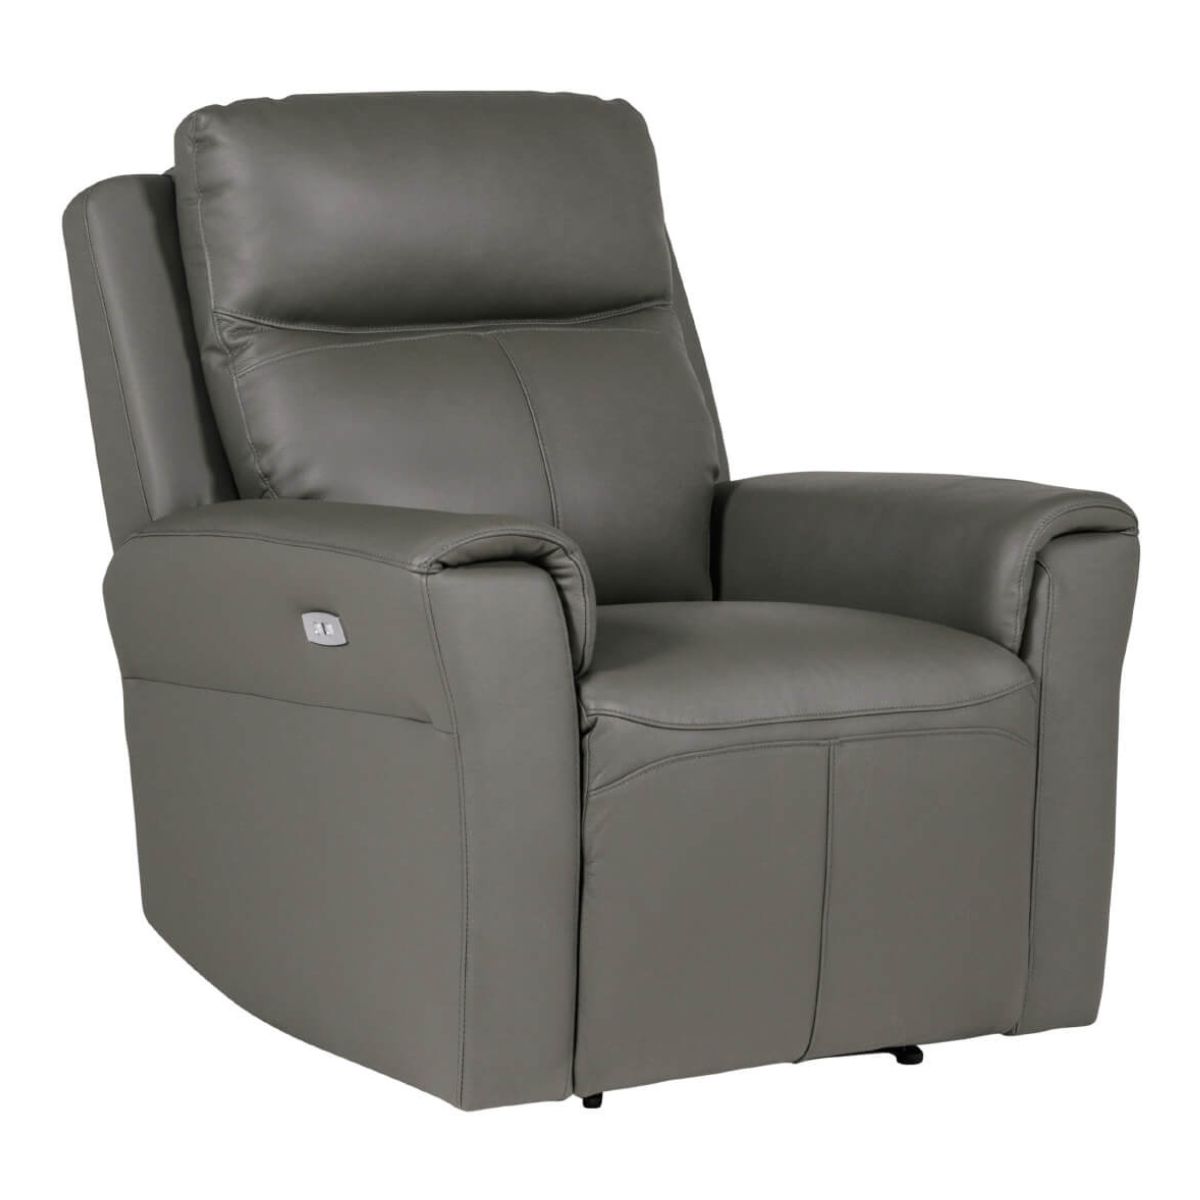 Rosslare Leather Electric Recliner Armchair Grey - 1